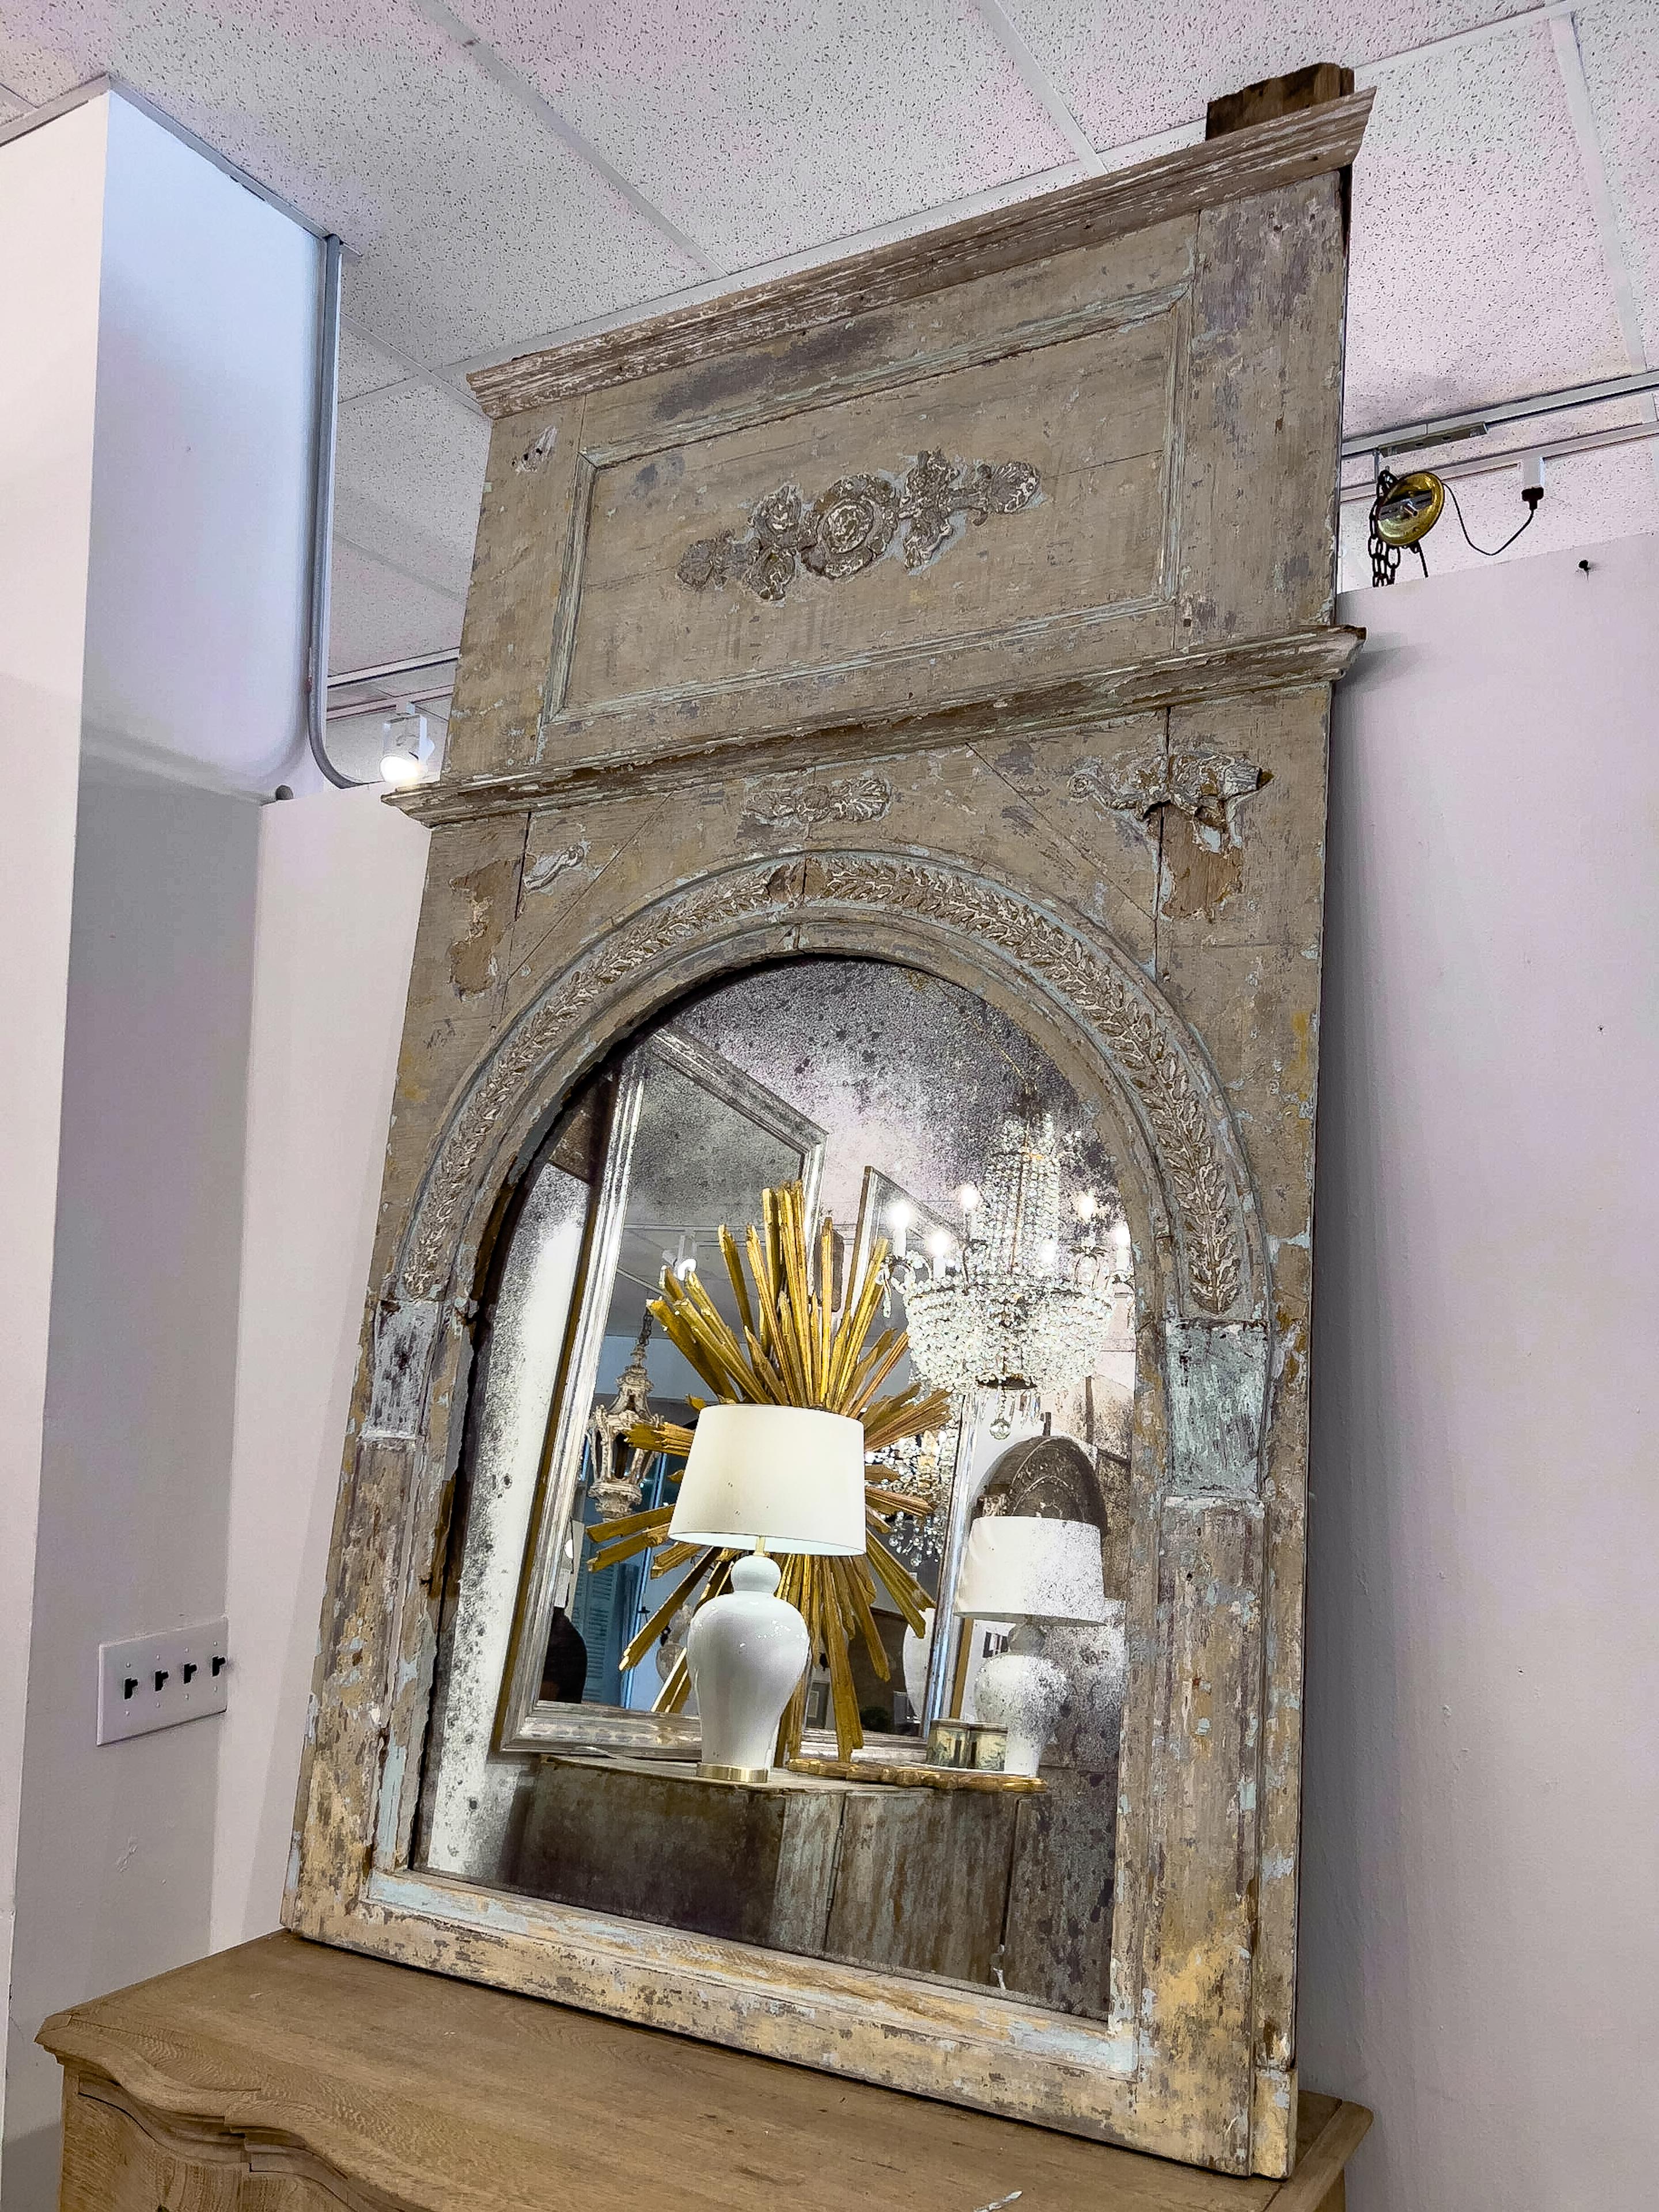 18th C. French Trumeau mirror with Neoclassical applique decoration and the original mirror that has dark inclusions and foggy appearance.